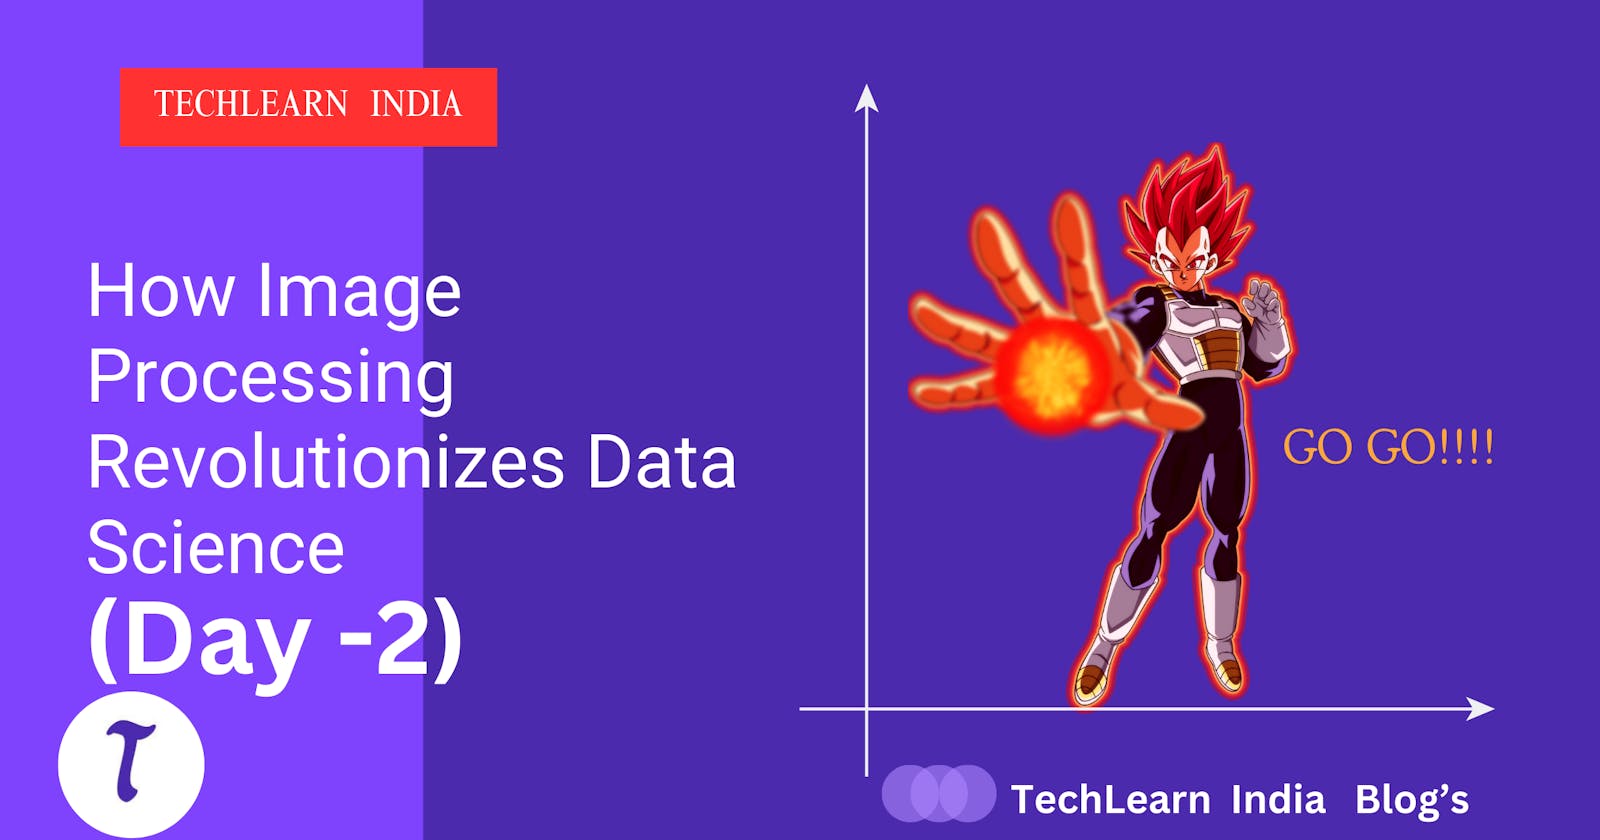 How Image Processing Revolutionizes Data Science (Day -2)